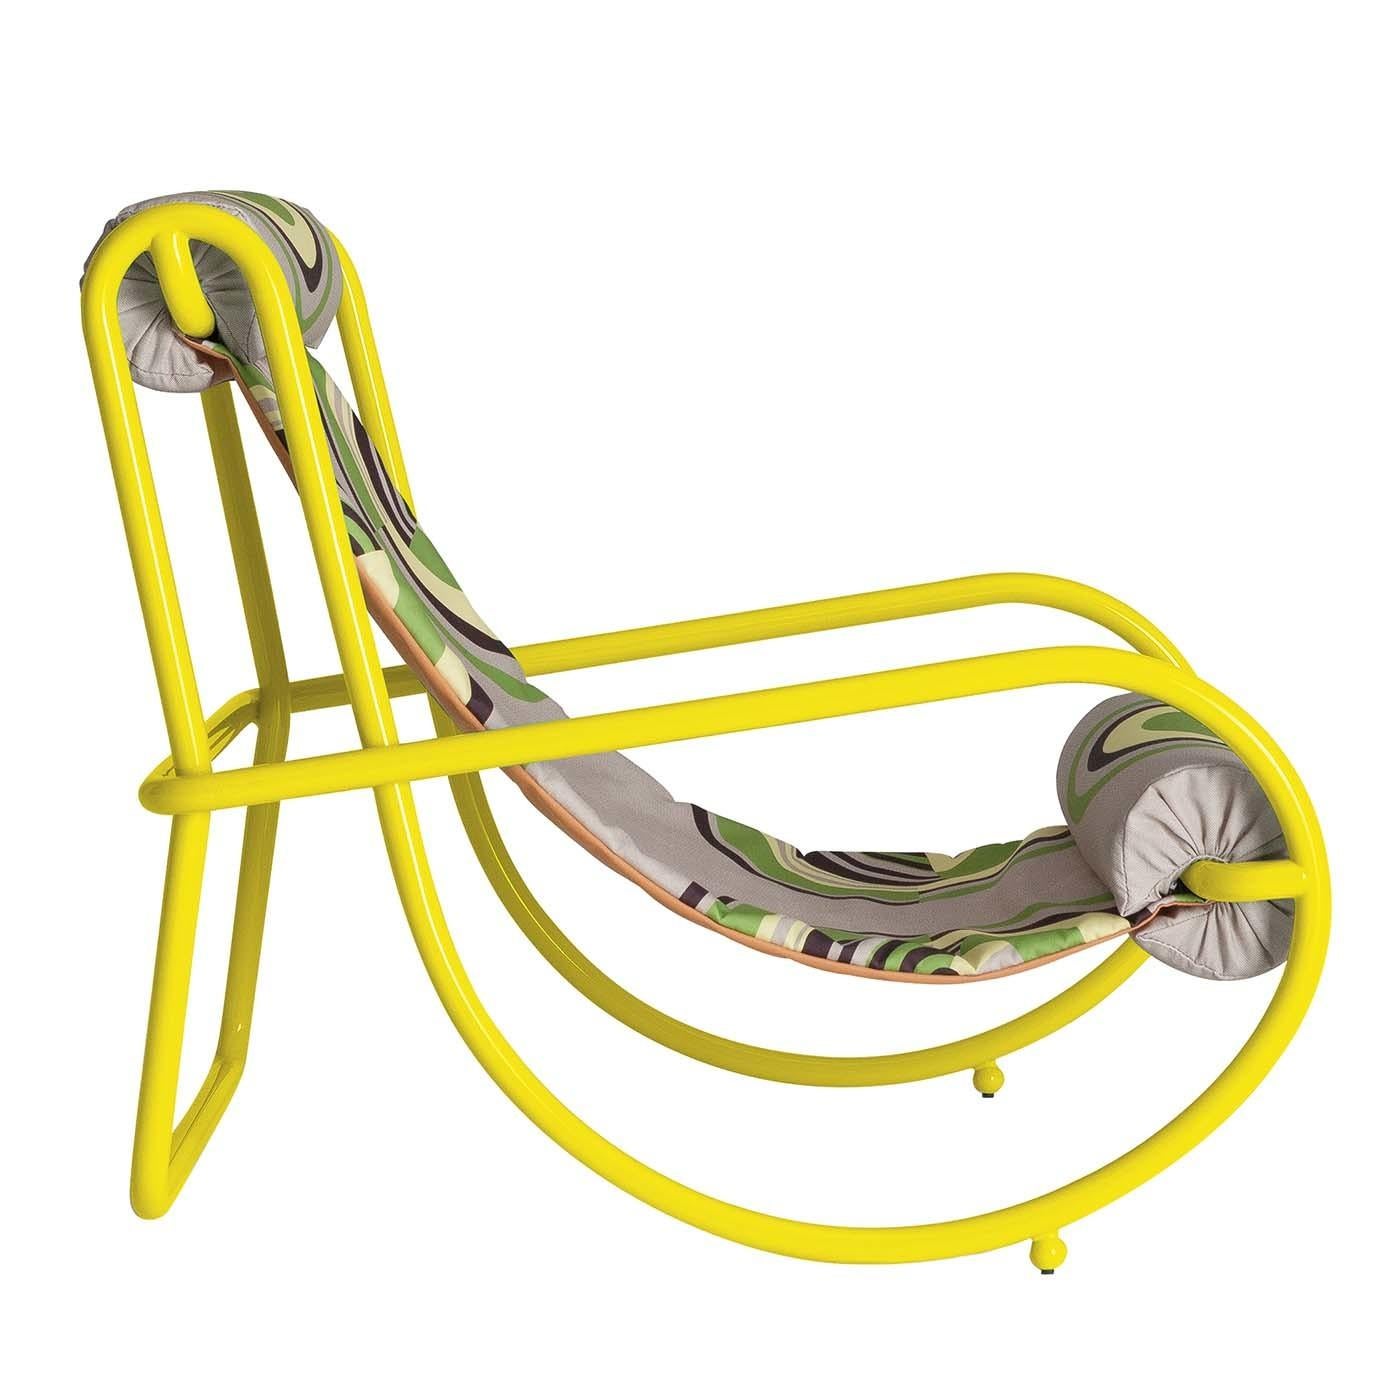 Perfect for the deck, pool, patio, and garden, this unique armchair features exaggerated volumes and a sinuous silhouette made of tubular steel finished in a bright yellow color. Designed by Italian architect Gae Aulenti in 1964 as part of the